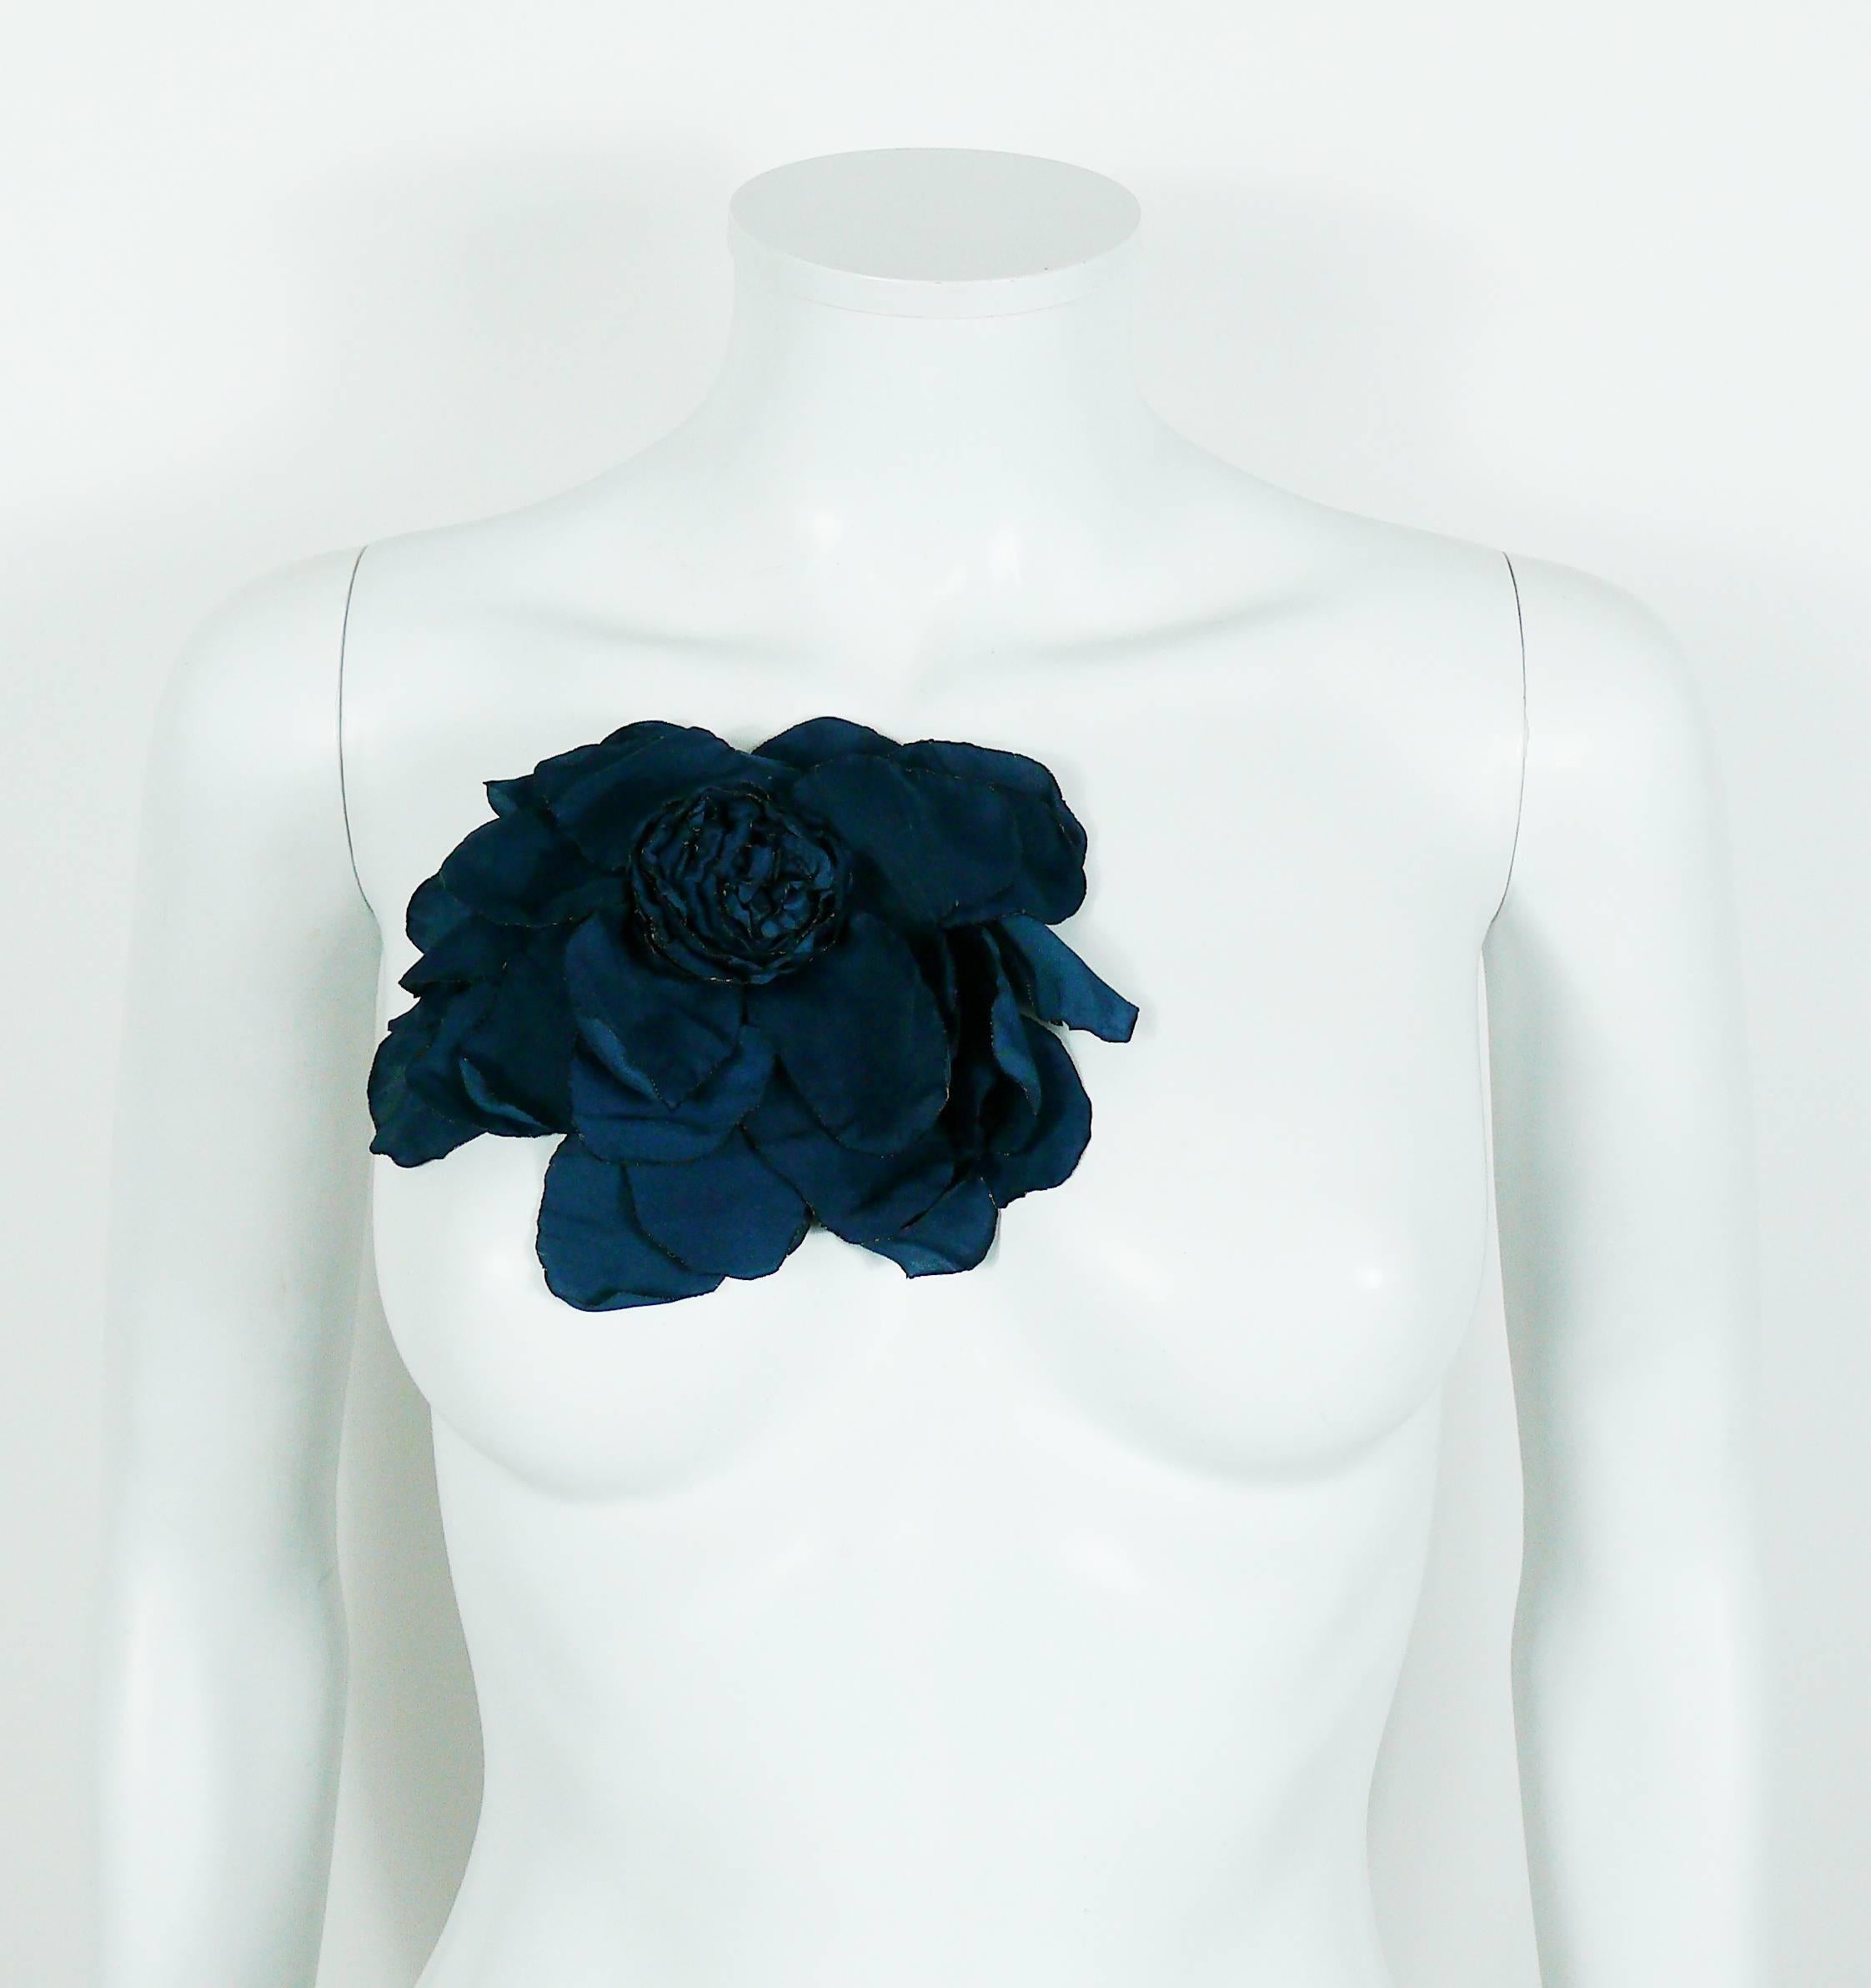 Gorgeous LANVIN blue silk oversized flower brooch.

Embossed LANVIN Paris Made in France.

Indicative measurements : max. height approx. 18 cm (7.09 inches) / max. width approx. 17 cm (6.69 inches).

IMPORTANT
Please note that true blue color is